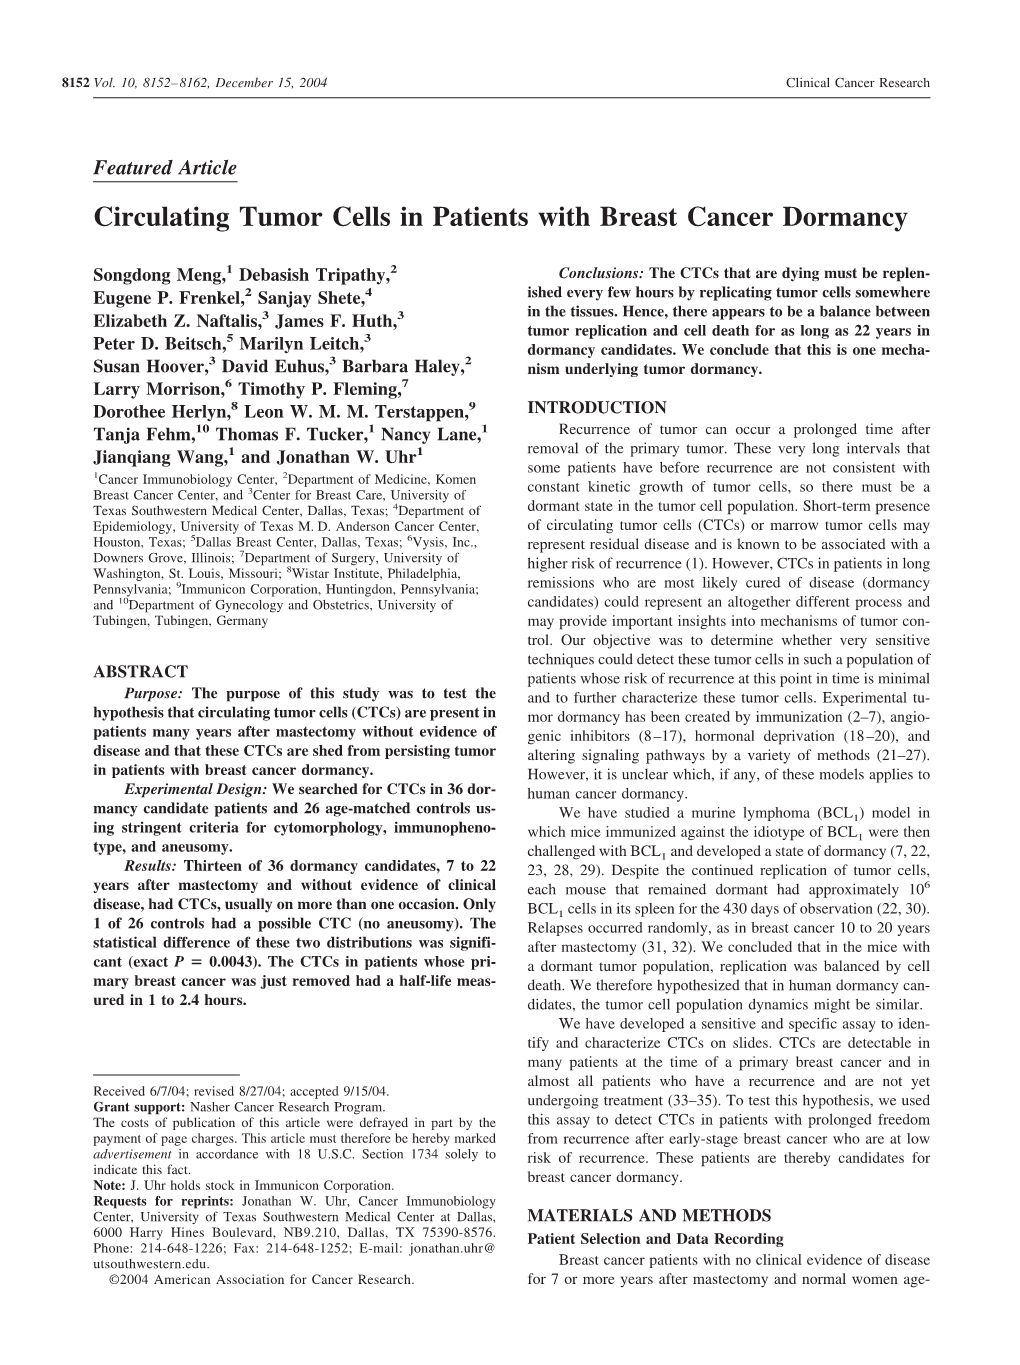 Circulating Tumor Cells in Patients with Breast Cancer Dormancy